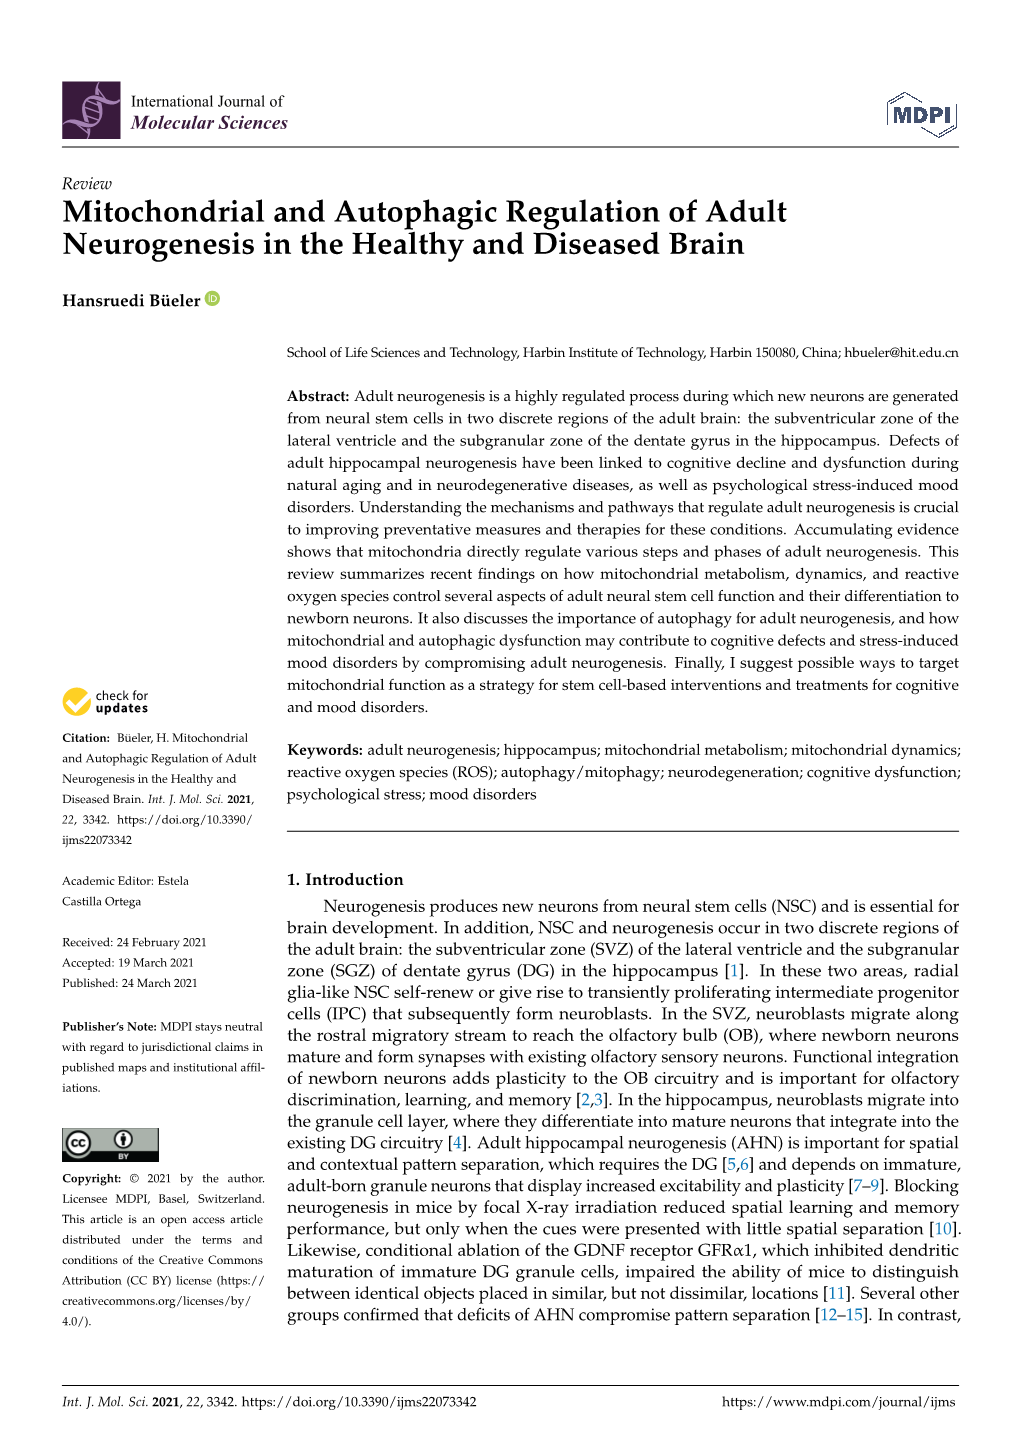 Mitochondrial and Autophagic Regulation of Adult Neurogenesis in the Healthy and Diseased Brain